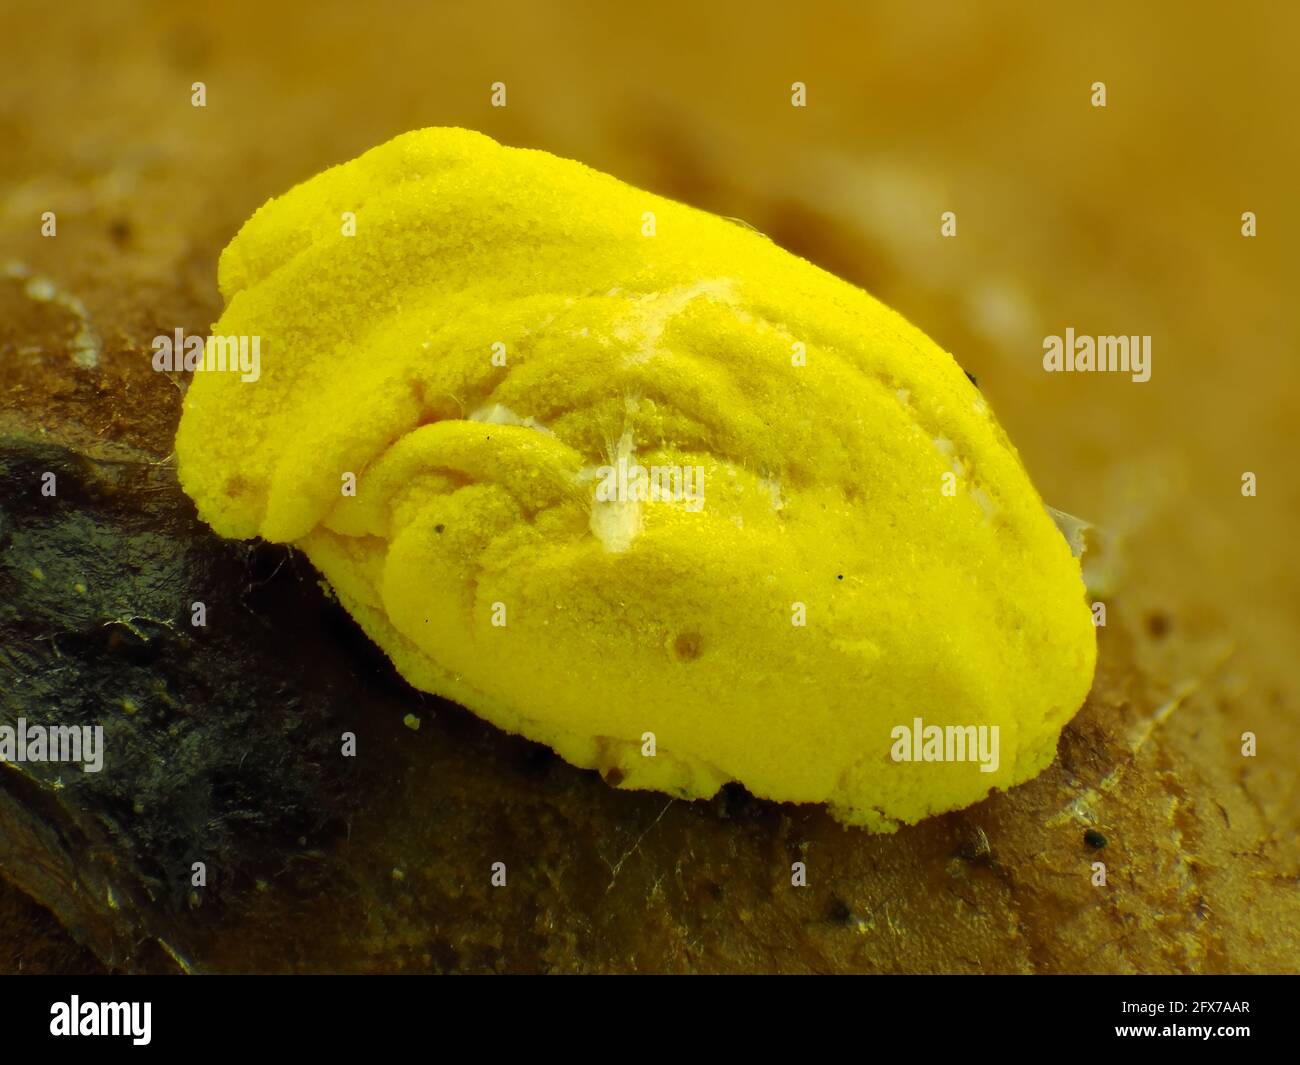 Yellow slime mold under the microscope, horizontal filed of view is about 3mm Stock Photo